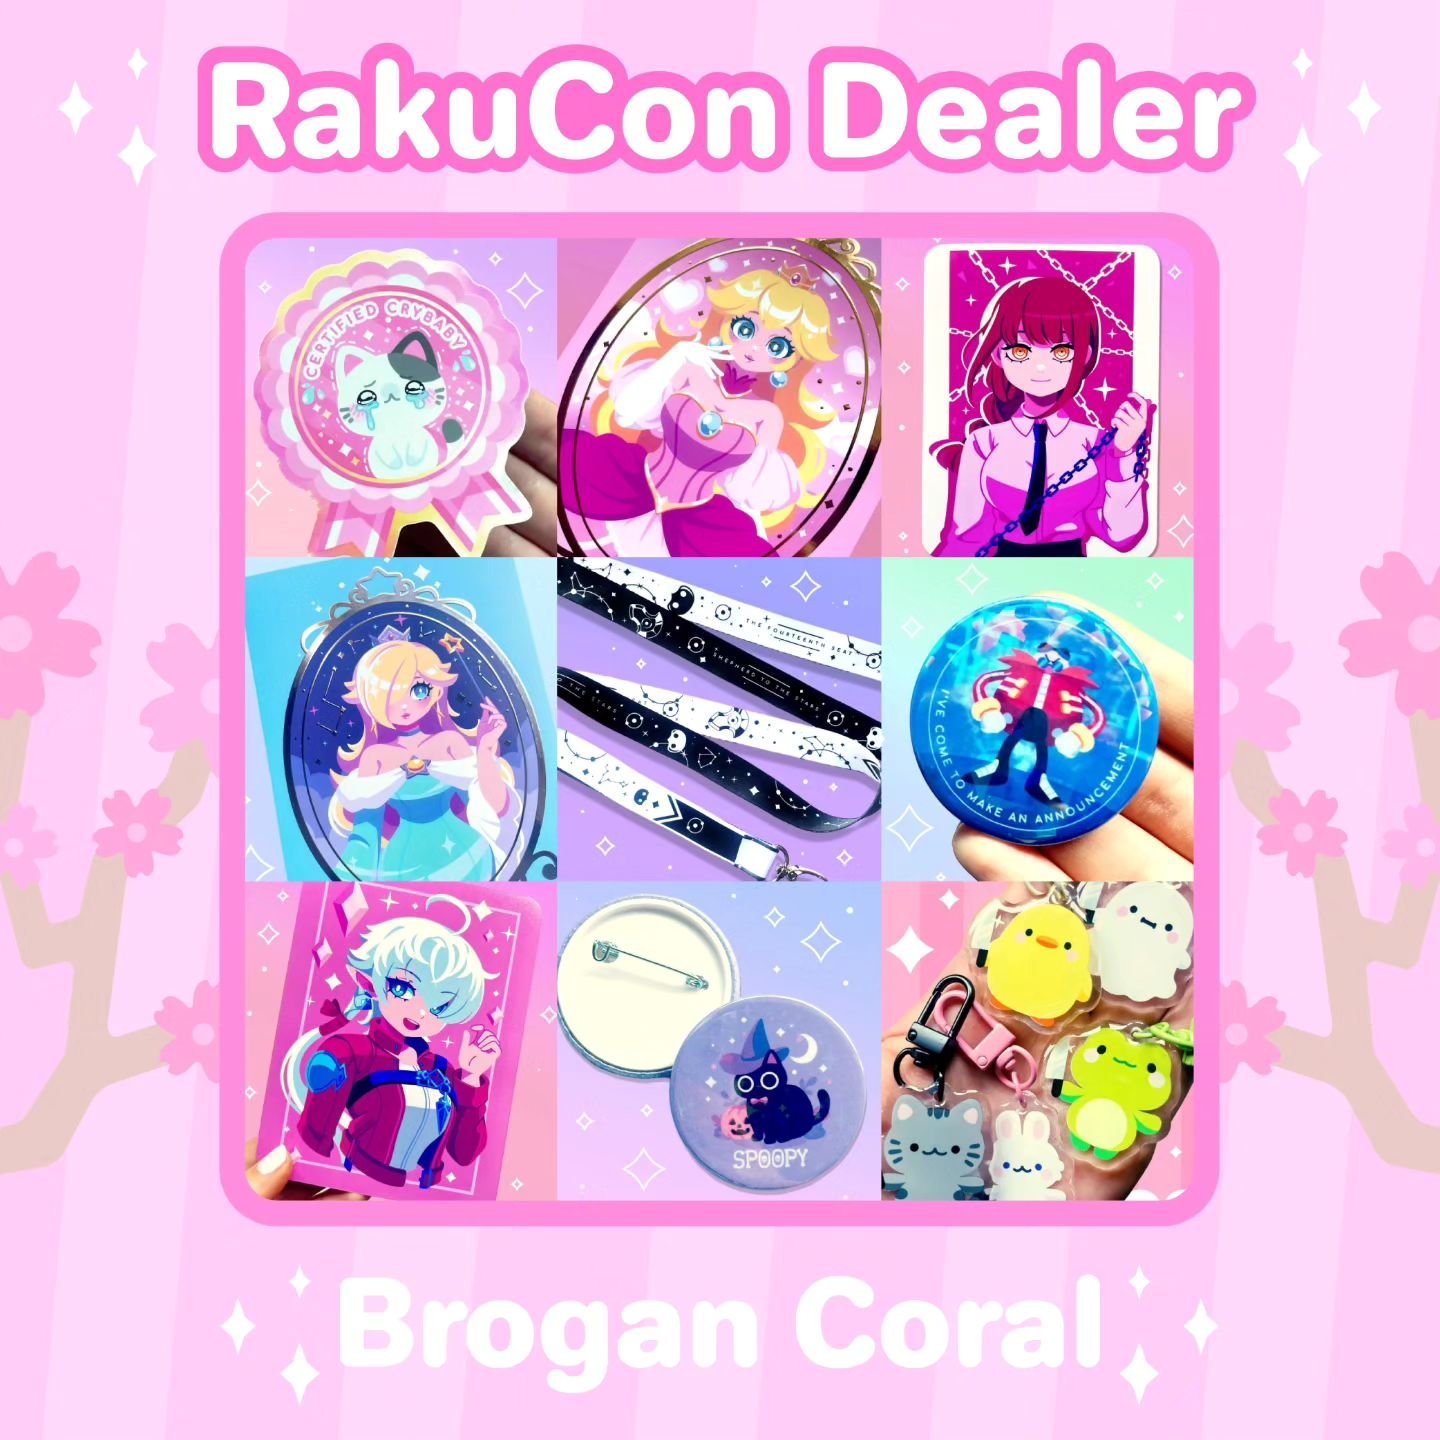 We're excited to welcome @brogancoral to RakuCon! 🌸 They sell a wonderful variety of prints, stickers, acrylic charms, badges and more! 💕 Swipe across to check out their amazing work! 🩷

#animeconvention #ukconvention #convention #comiccon #rakuco